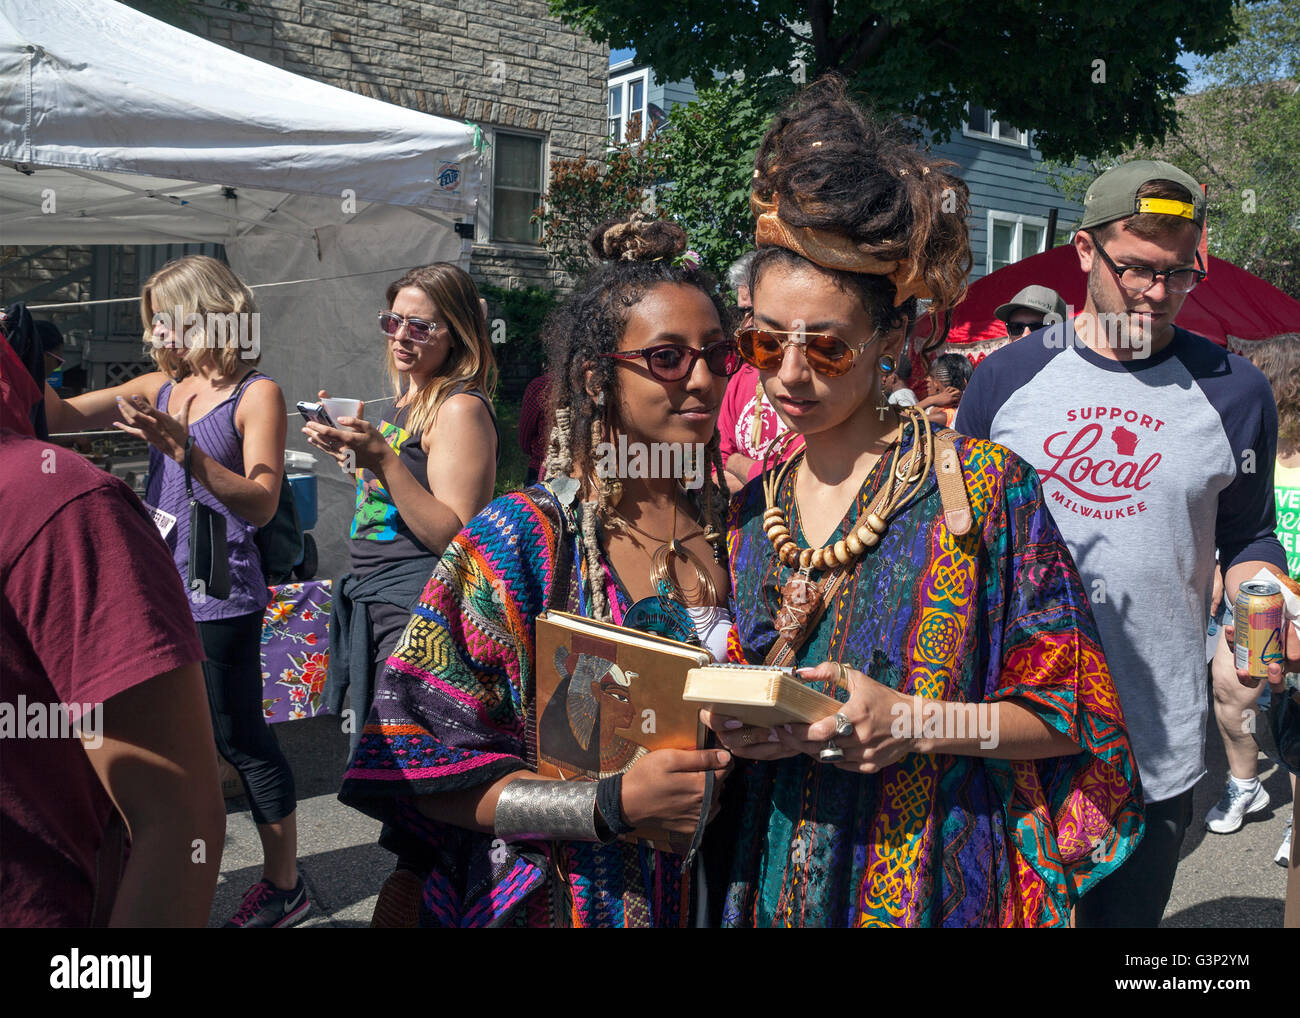 The Locust Street Festival in Milwaukee, Wisconsin, USA is an annual